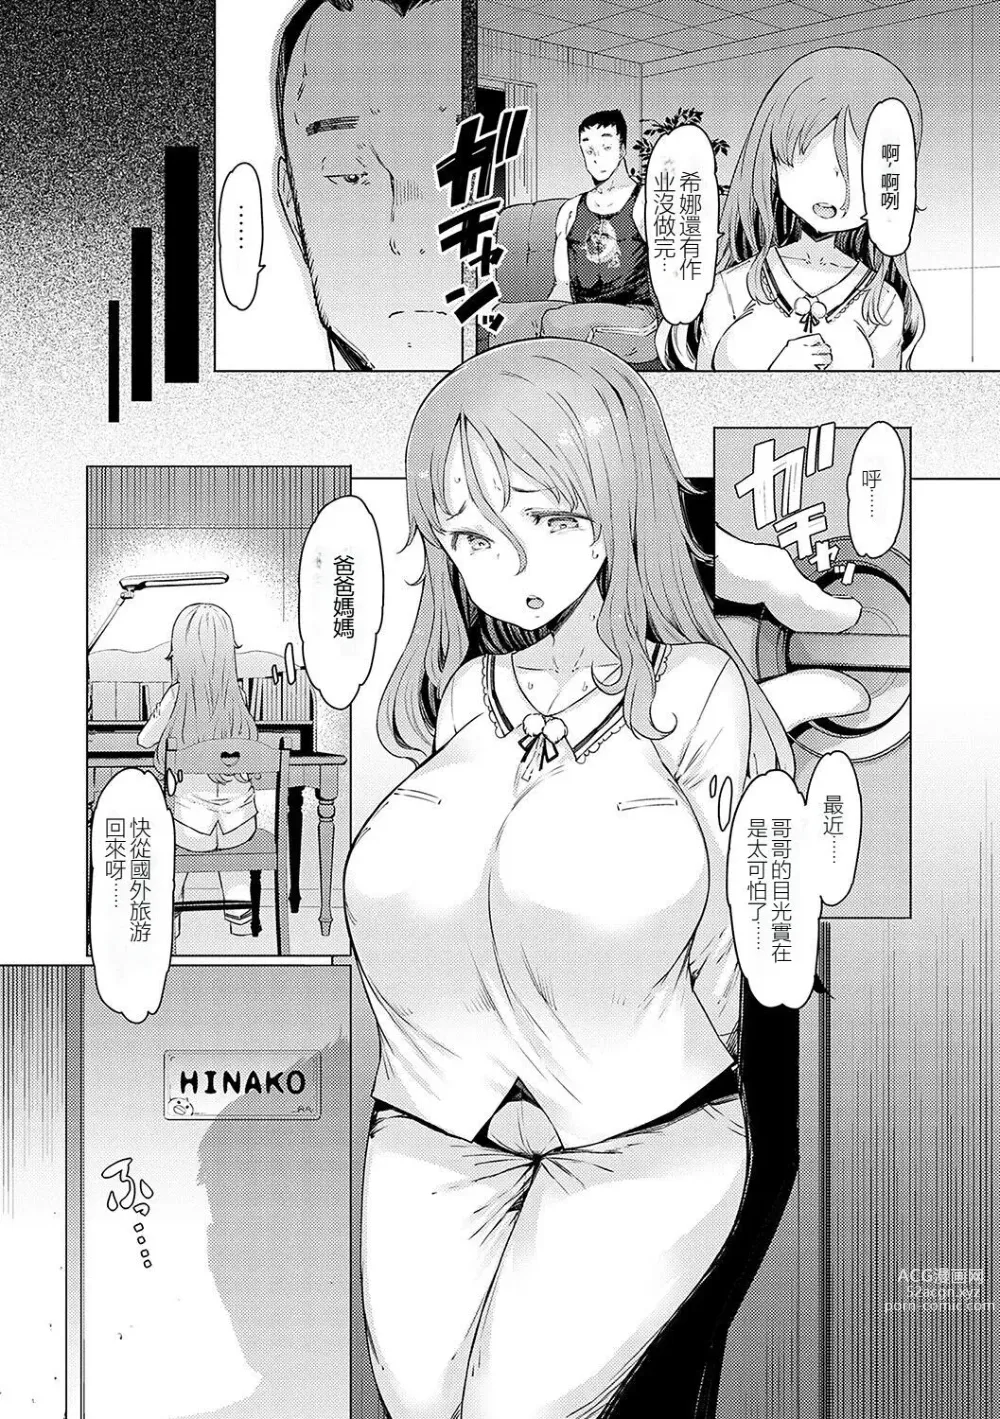 Page 2 of manga Oya no Inai Hi - Parent absent day